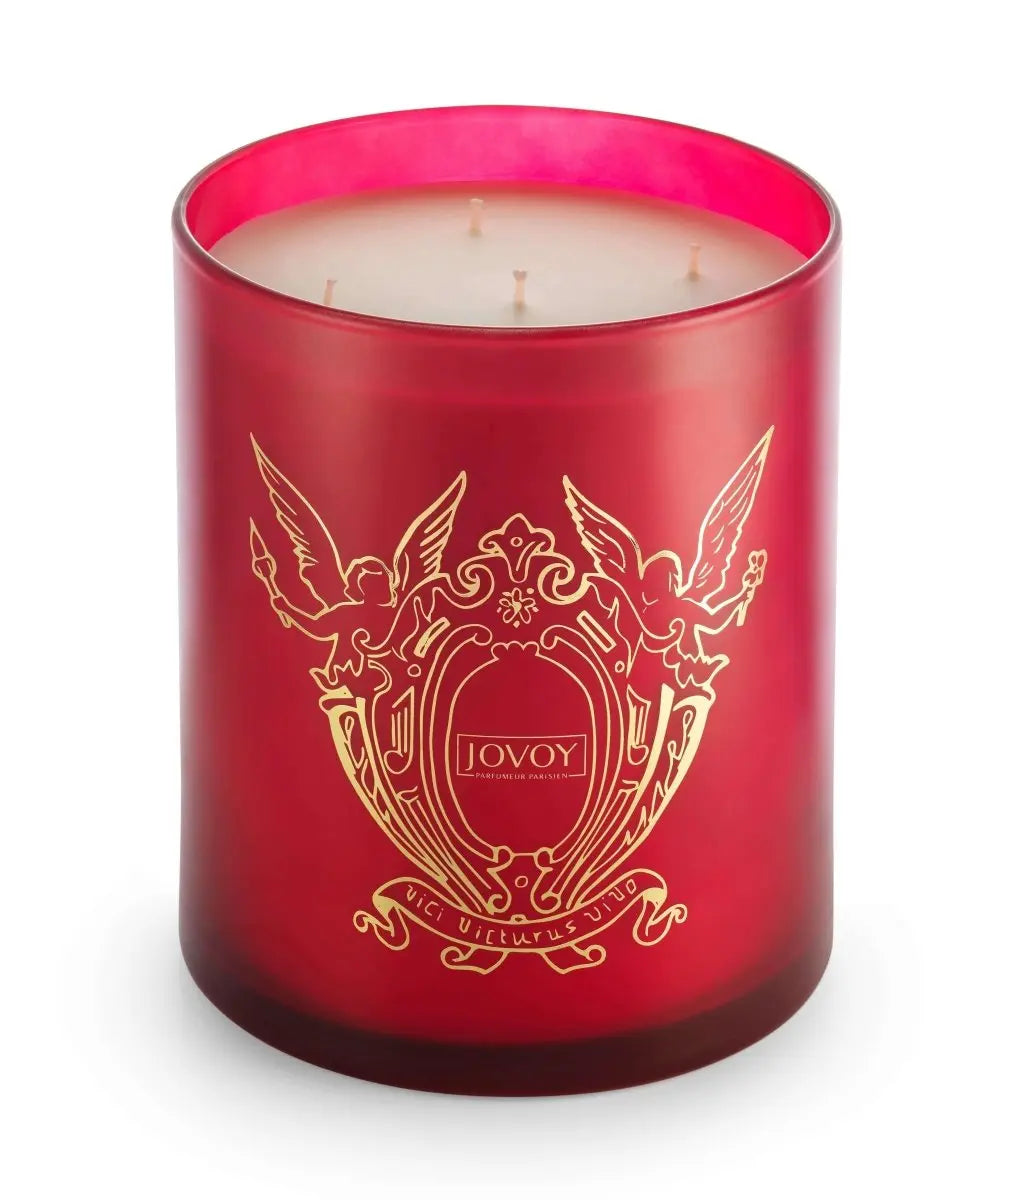 Jovoy Candles 185 gr. - Marron \/ With glass bell